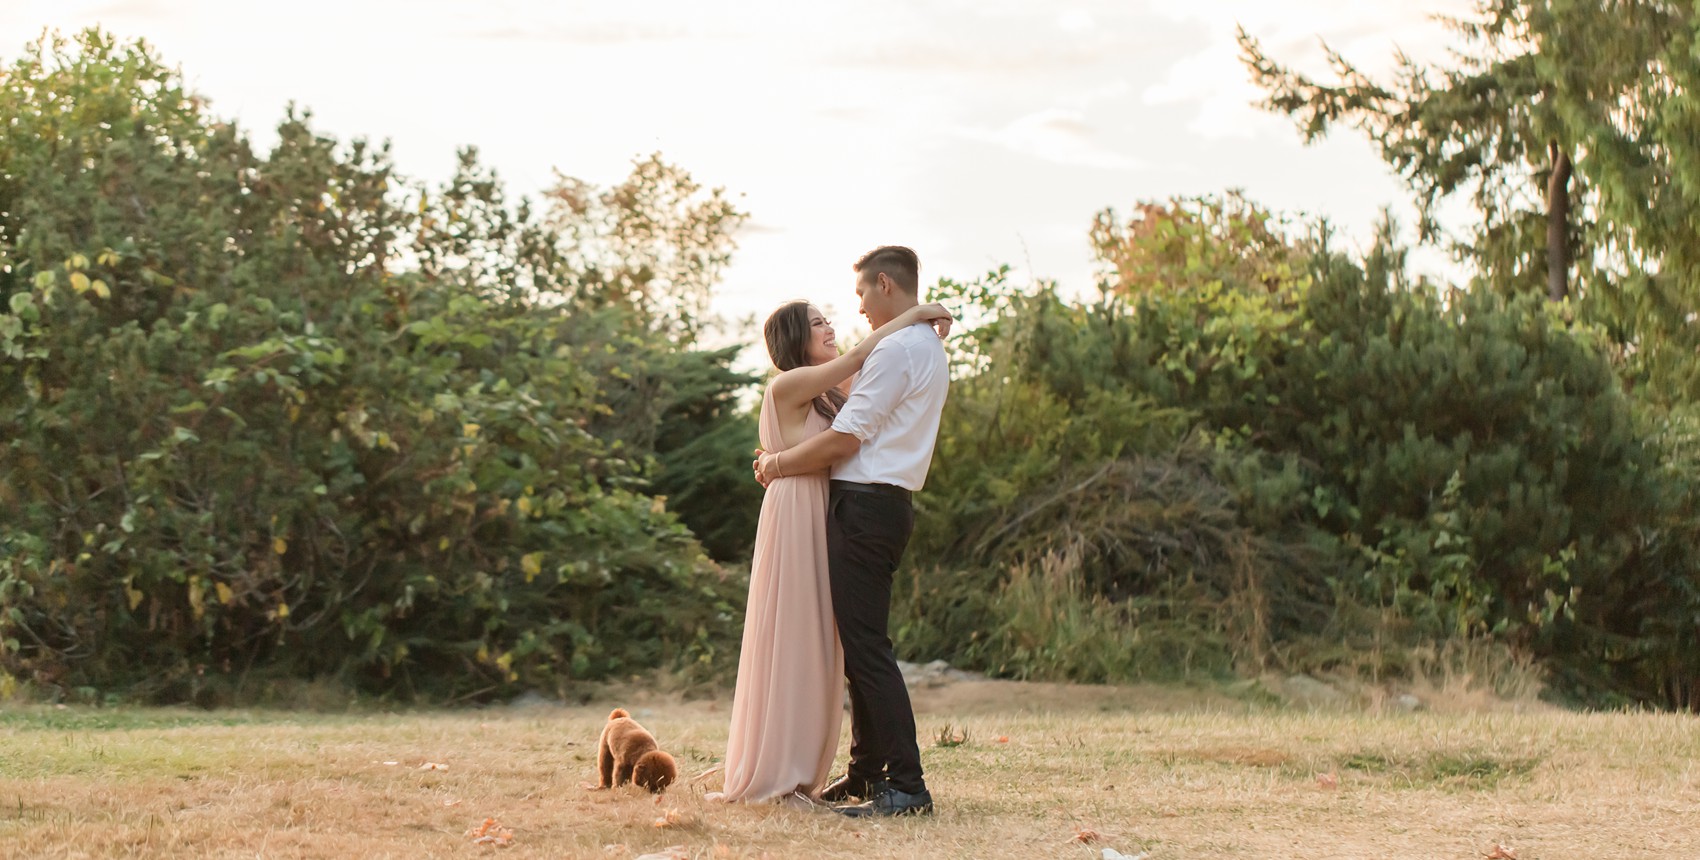 West Vancouver Whytecliff Engagement photos - couple dancing, puppy sniffing the grass next to the couple